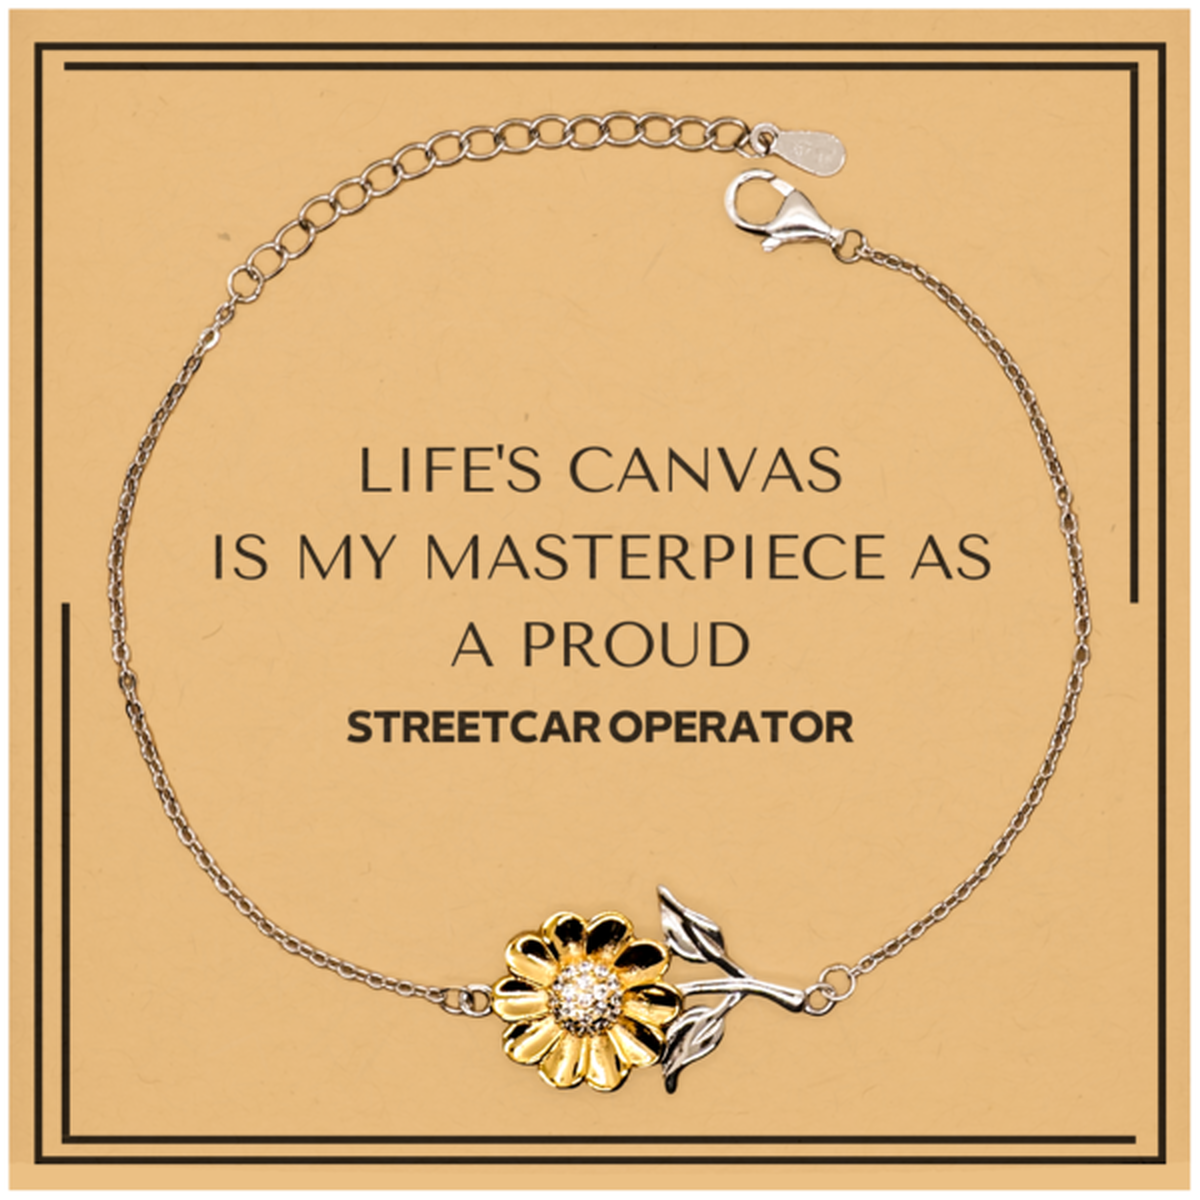 Proud Streetcar Operator Gifts, Life's canvas is my masterpiece, Epic Birthday Christmas Unique Sunflower Bracelet For Streetcar Operator, Coworkers, Men, Women, Friends